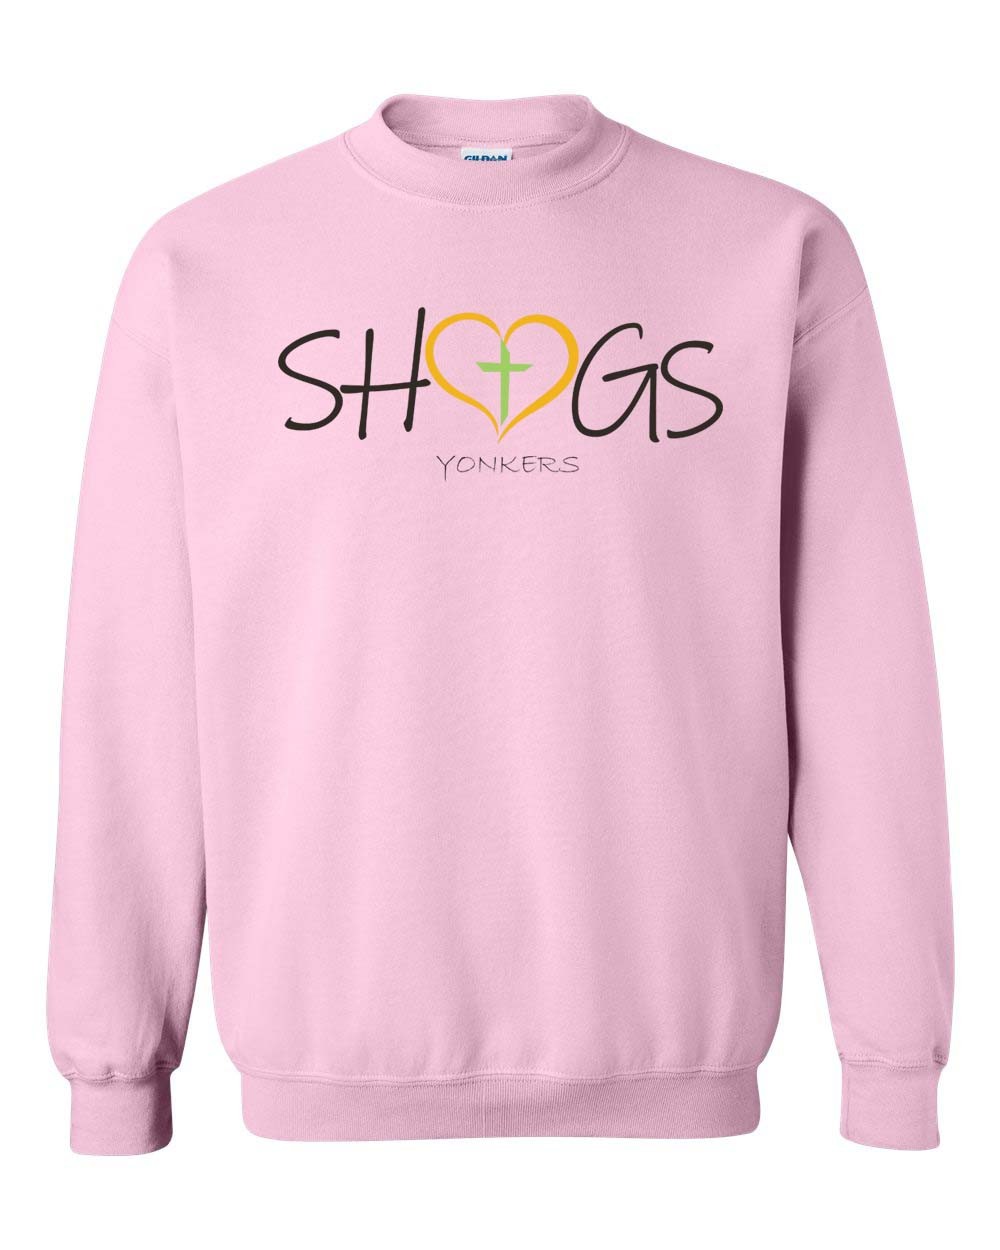 SHGS Spirit Sweatshirt w/ Heart Logo ADULT ONLY - Please Allow 2-3 Weeks for Delivery